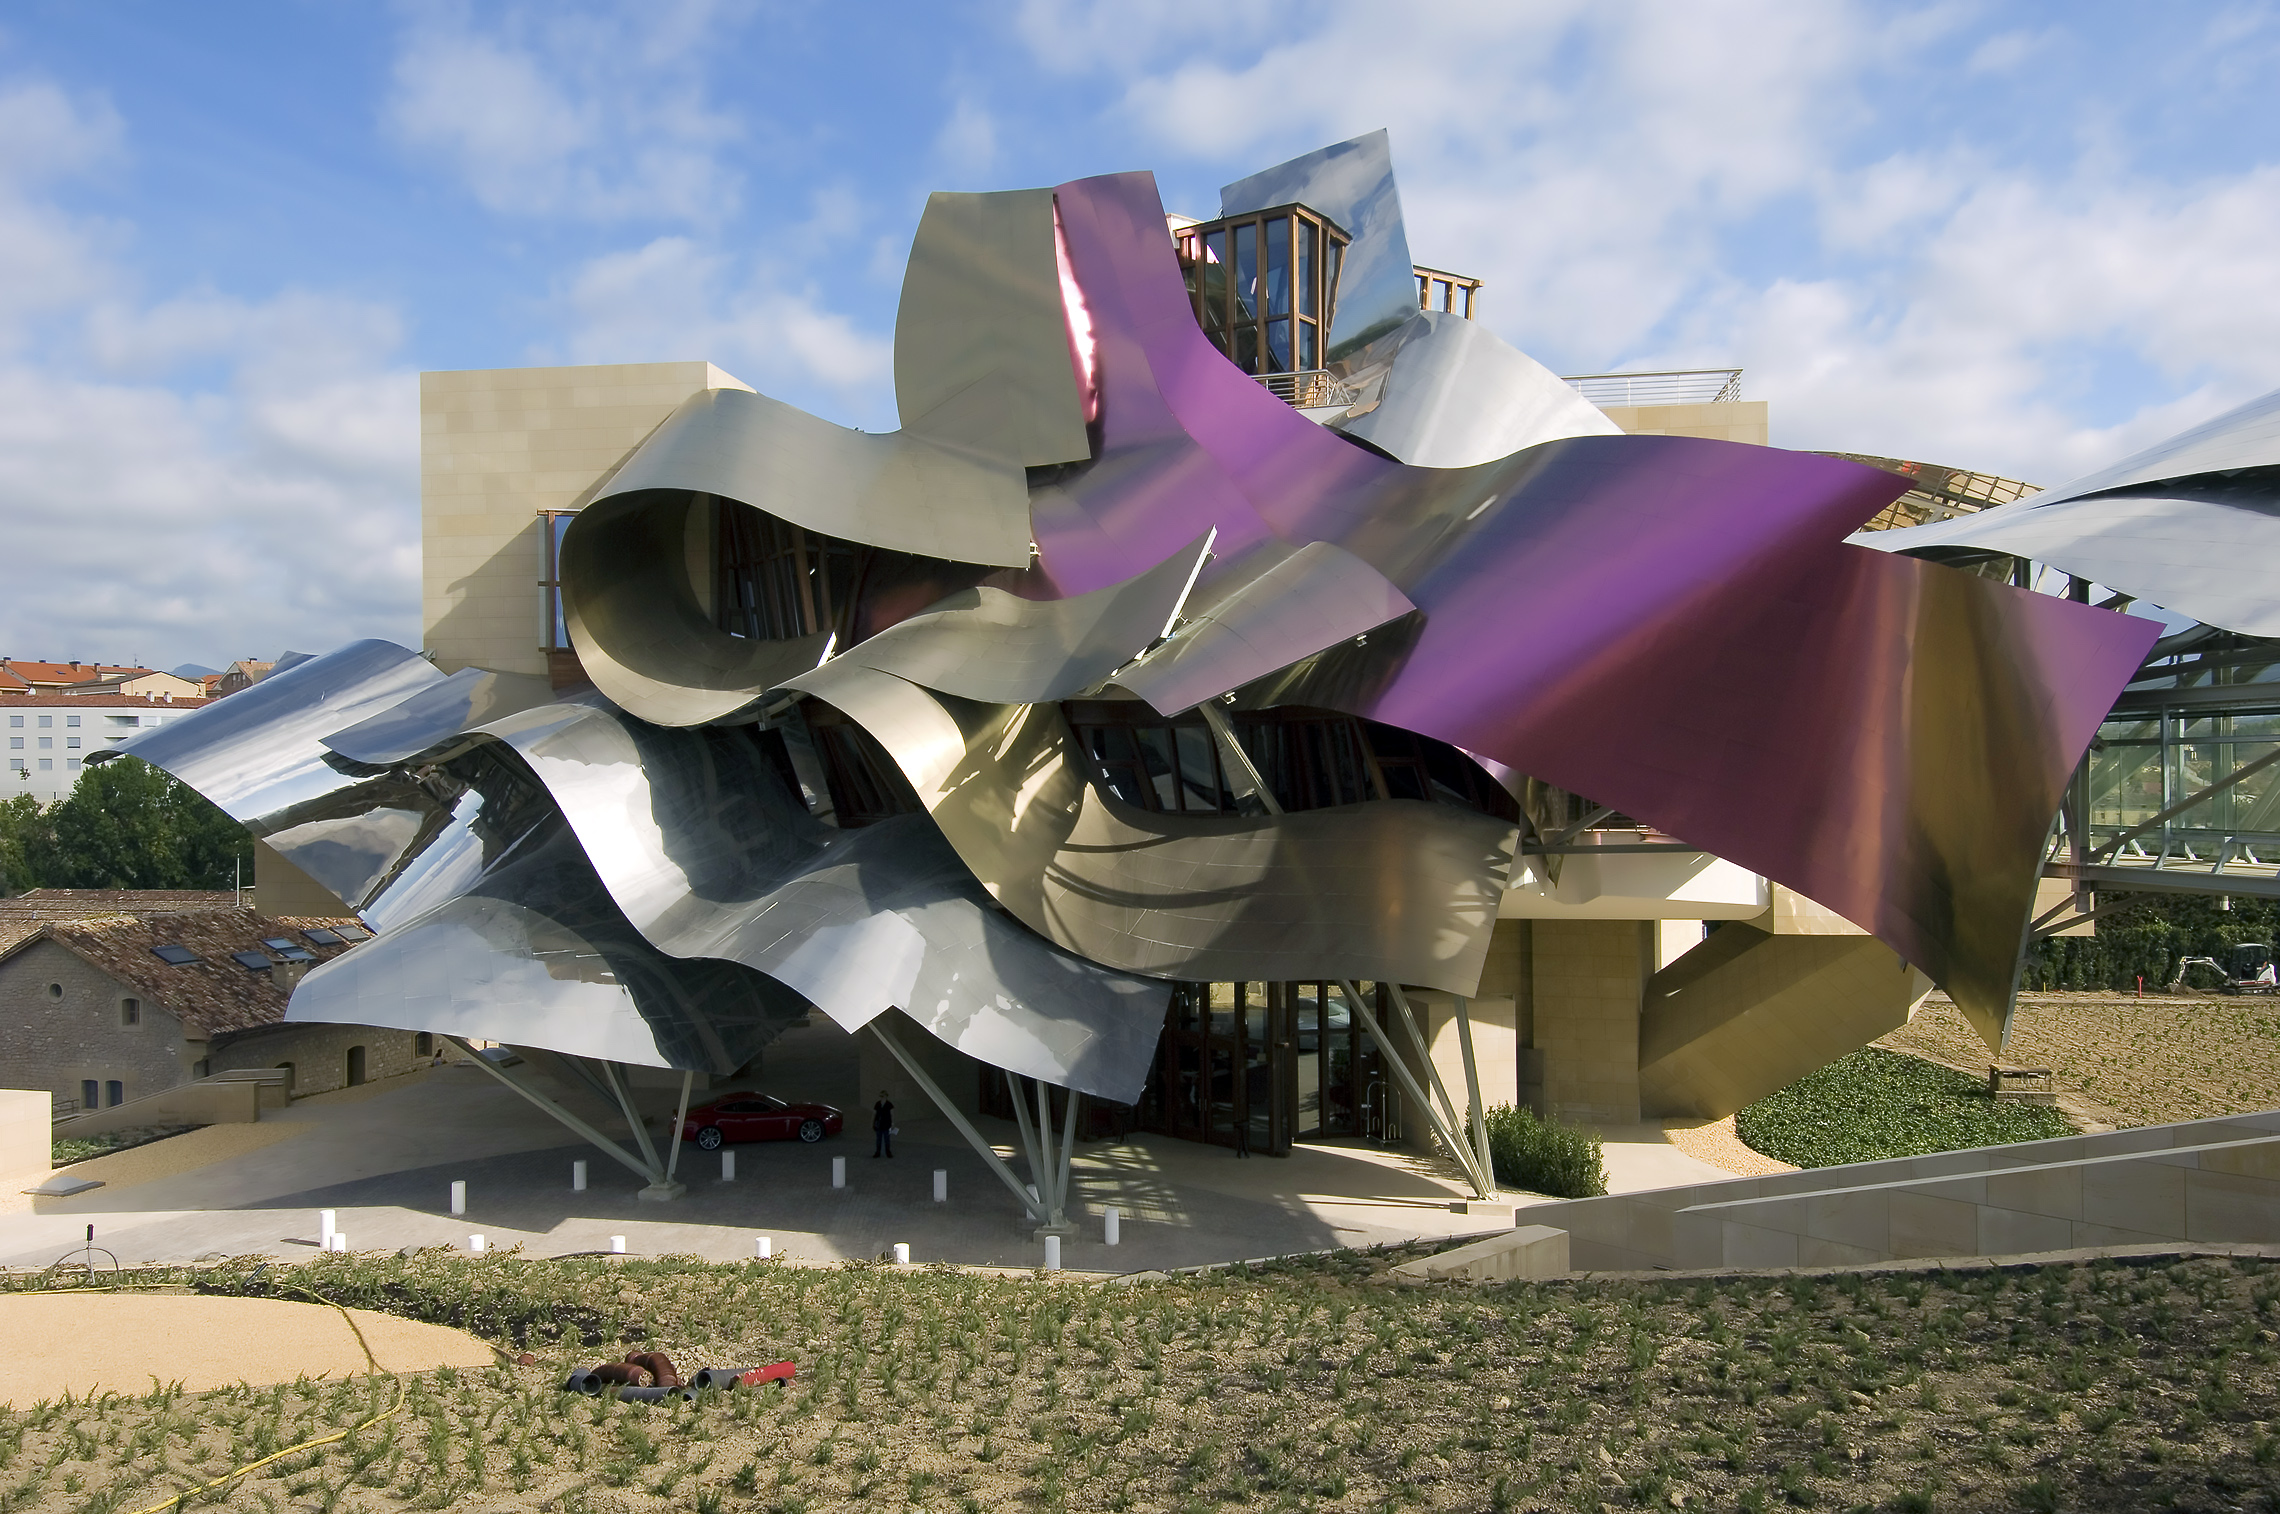 Frank O. Gehry  Academy of Achievement